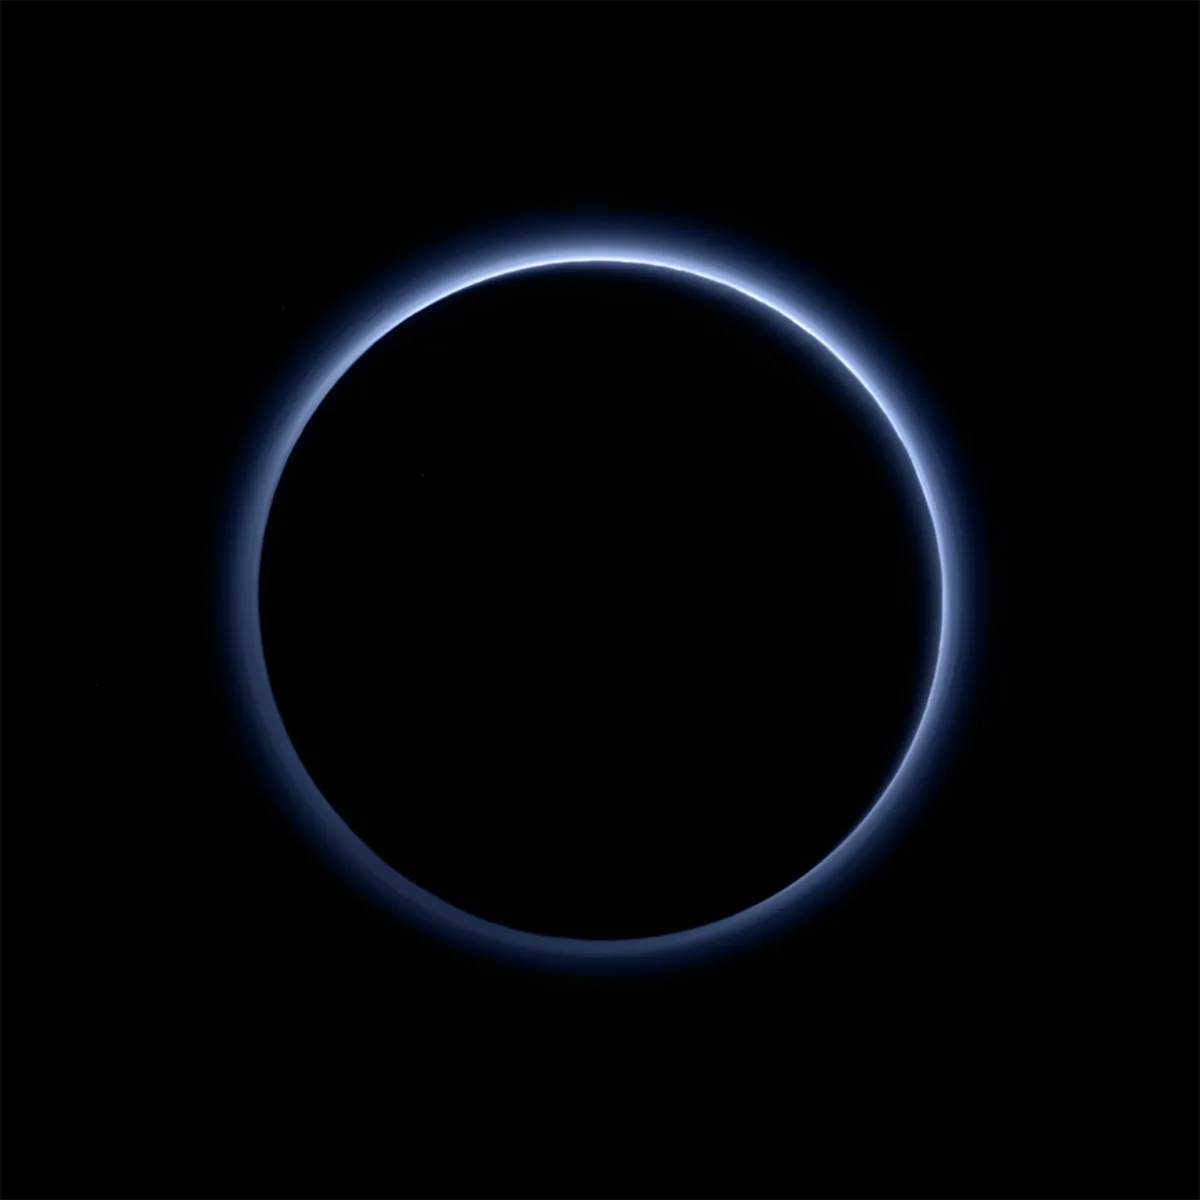 Once the 9th planet in the Solar System, Pluto is now classified as a Kuiper Belt Object. Credit: NASA/JHUAPL/SwRI